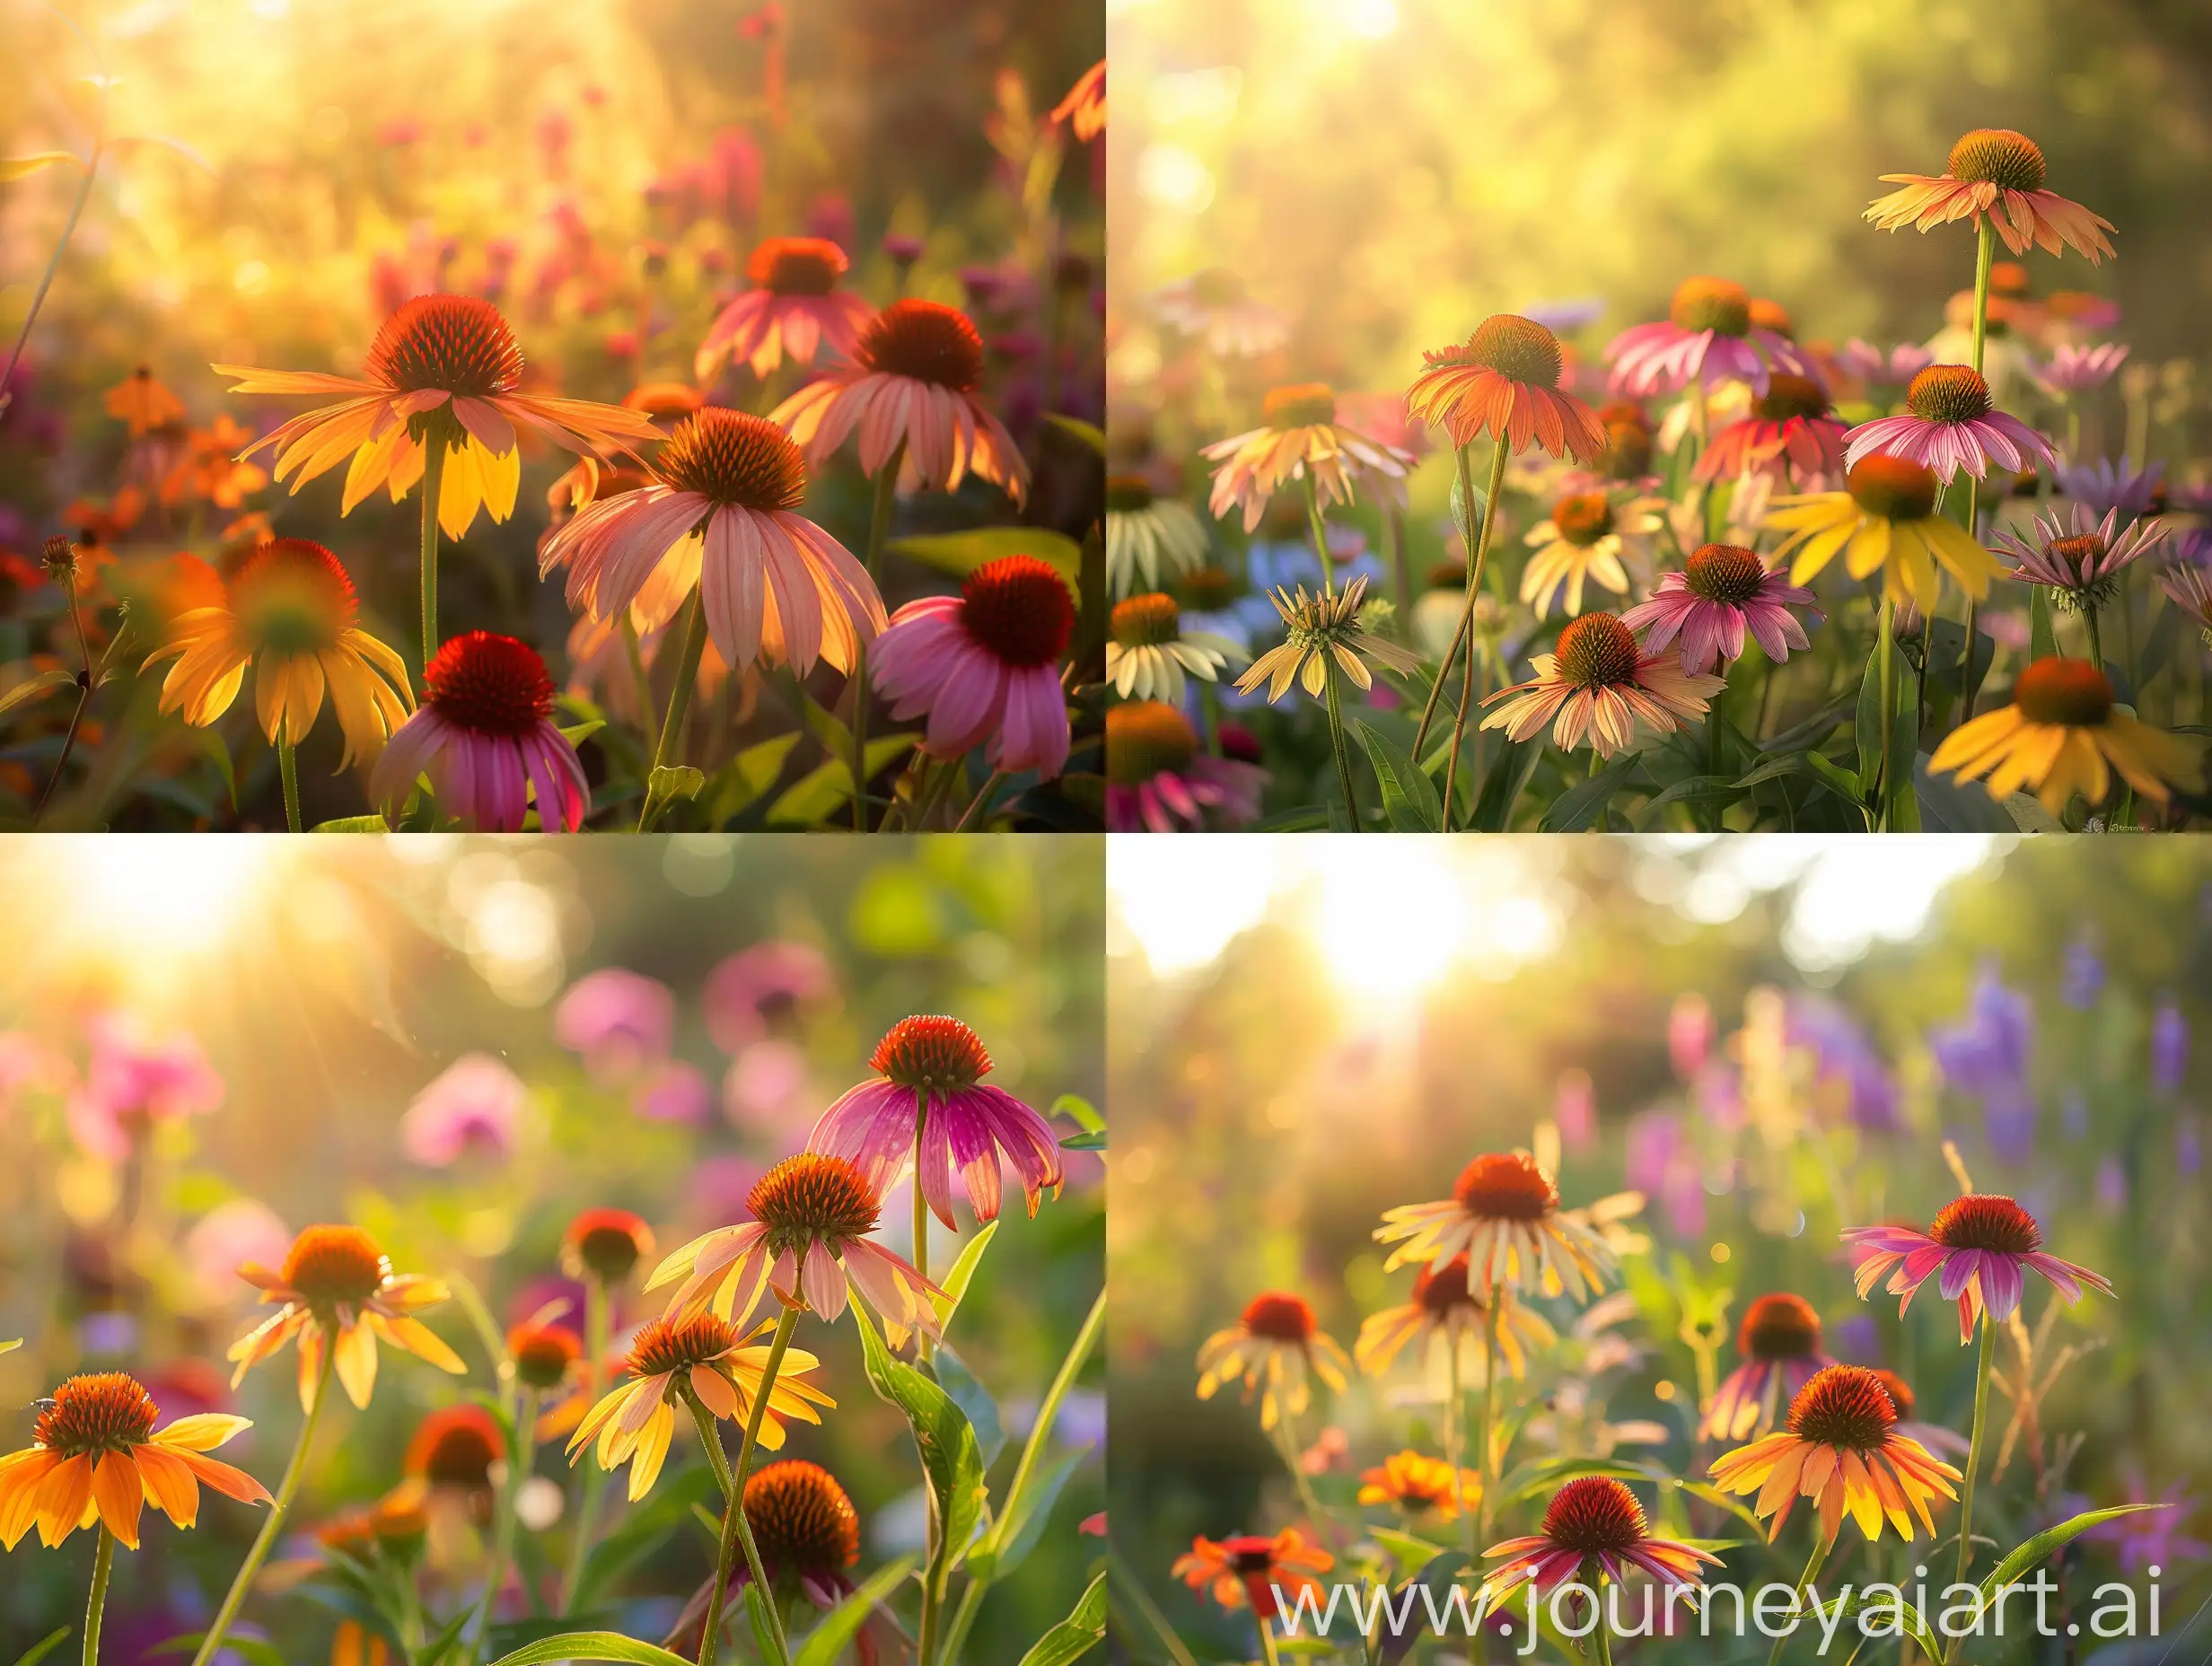 High detailed photo capturing a Echinacea, Warm Summer. The sun, casting a warm, golden glow, bathes the scene in a serene ambiance, illuminating the intricate details of each element. The composition centers on a Echinacea, Warm Summer. A magical palette of coneflowers in lush, warm colors creates a tropical garden spectacle from June through August. Single flowers in juicy shades of orange, yellow, scarlet, rose, purple and cream stand 26-30" tall. On long, strong stems, they create stu. The image evokes a sense of tranquility and natural beauty, inviting viewers to immerse themselves in the splendor of the landscape. --ar 16:9 